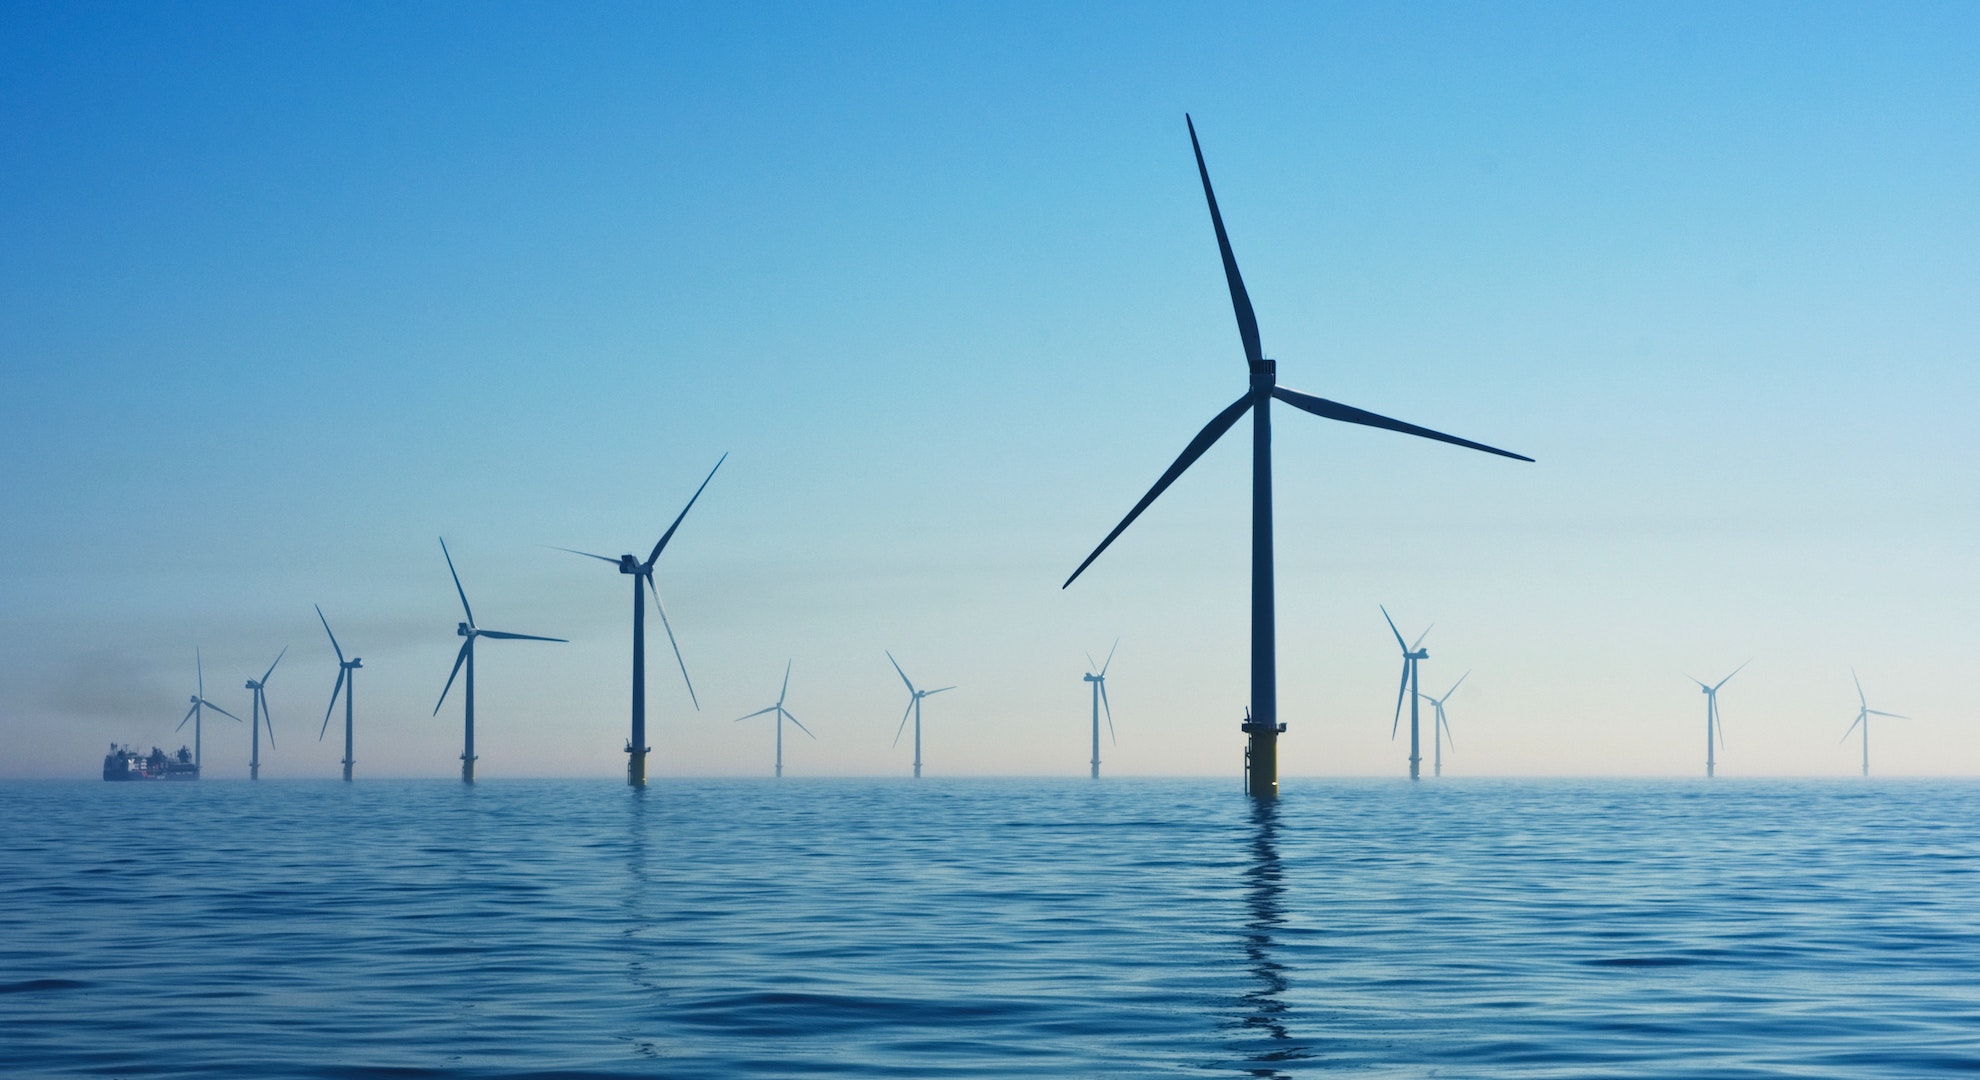 Rampion offshore wind farm in the UK producing renewable energy